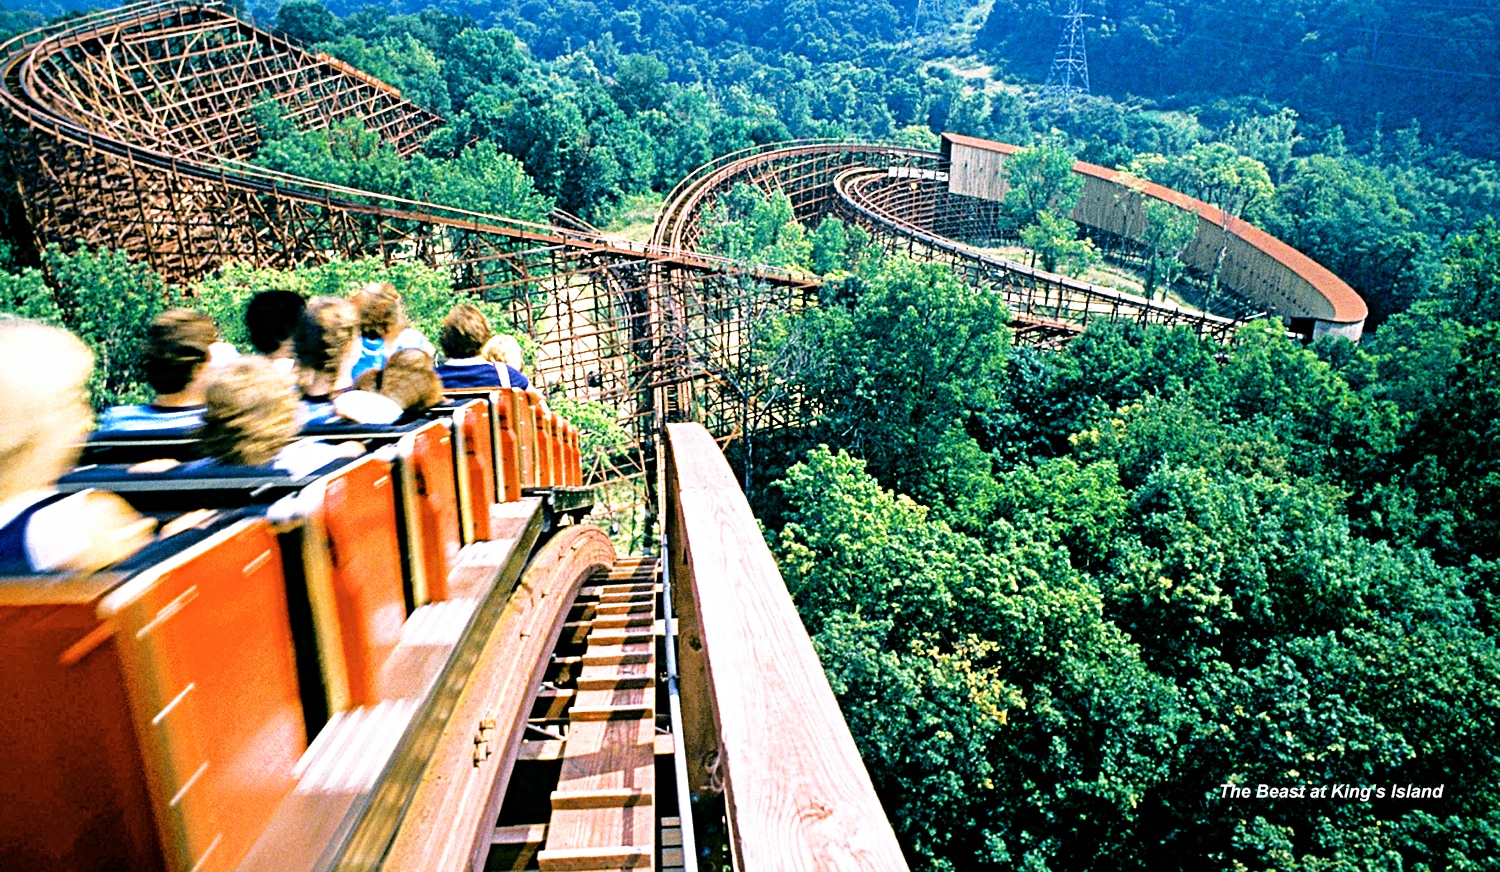 horizontal photo of The Beast Roller Coaster at King's Island with views of a wooded area in the background